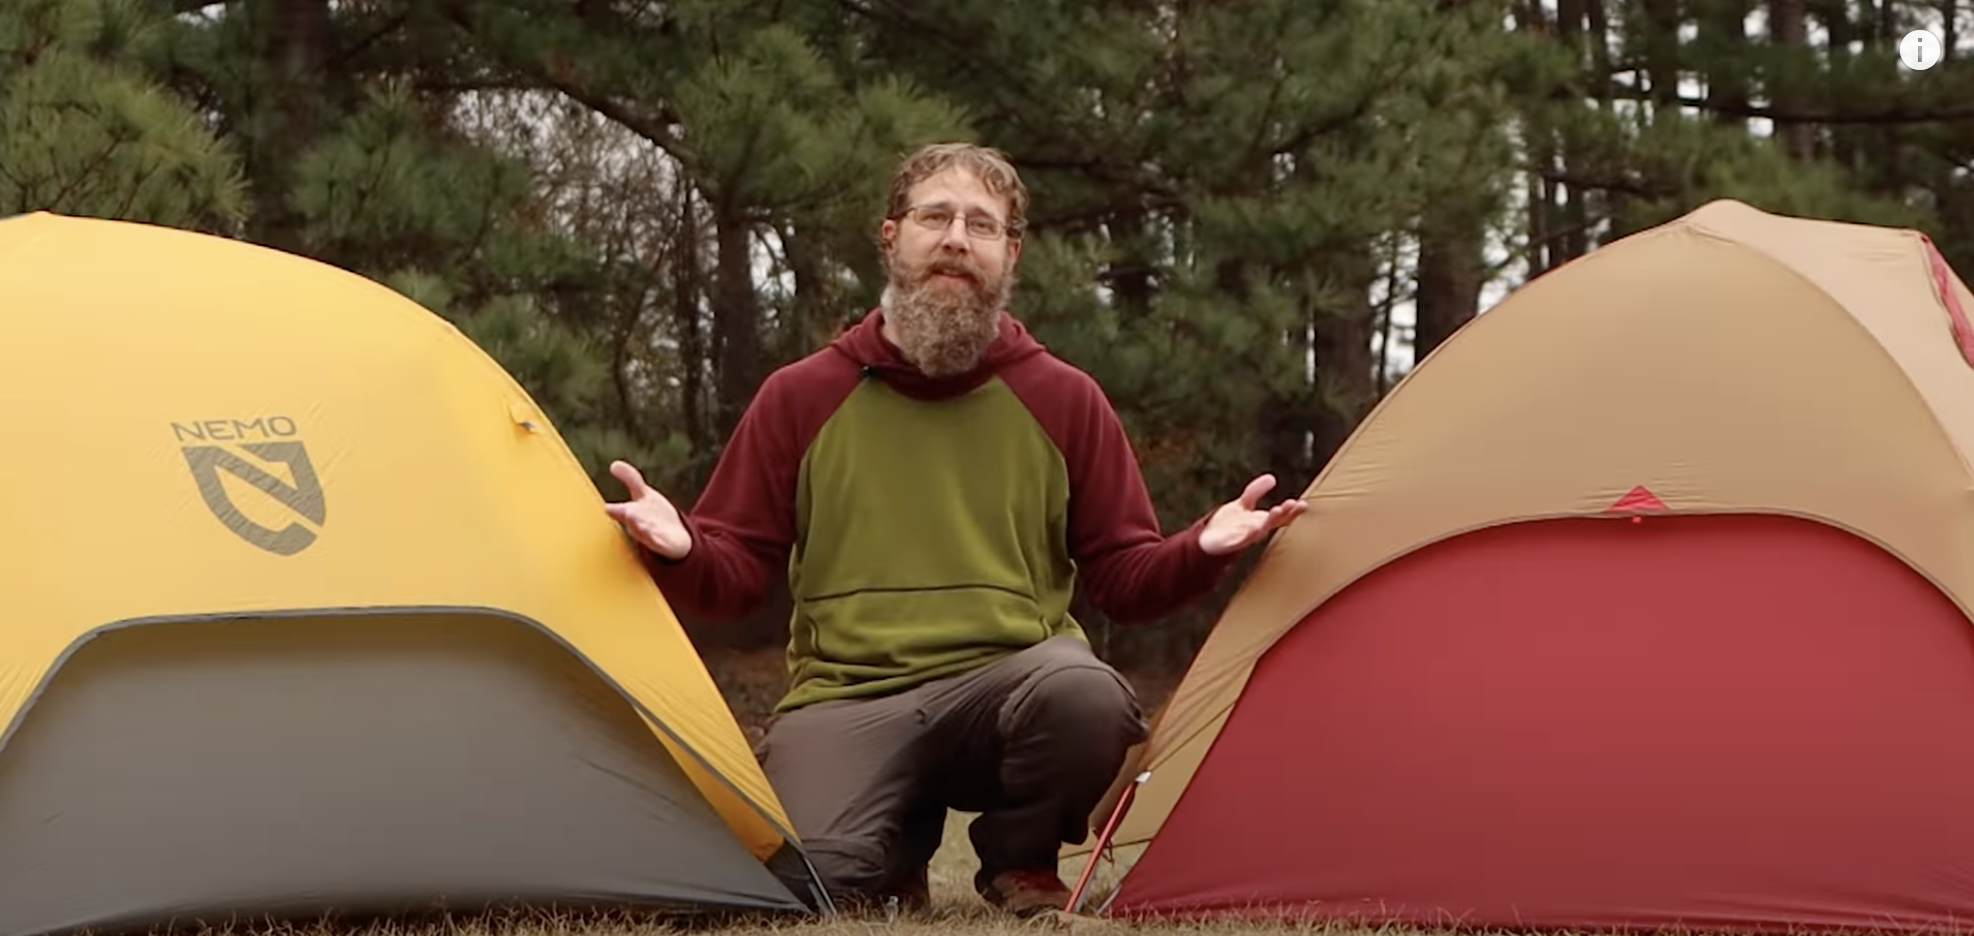 Comparing two tents